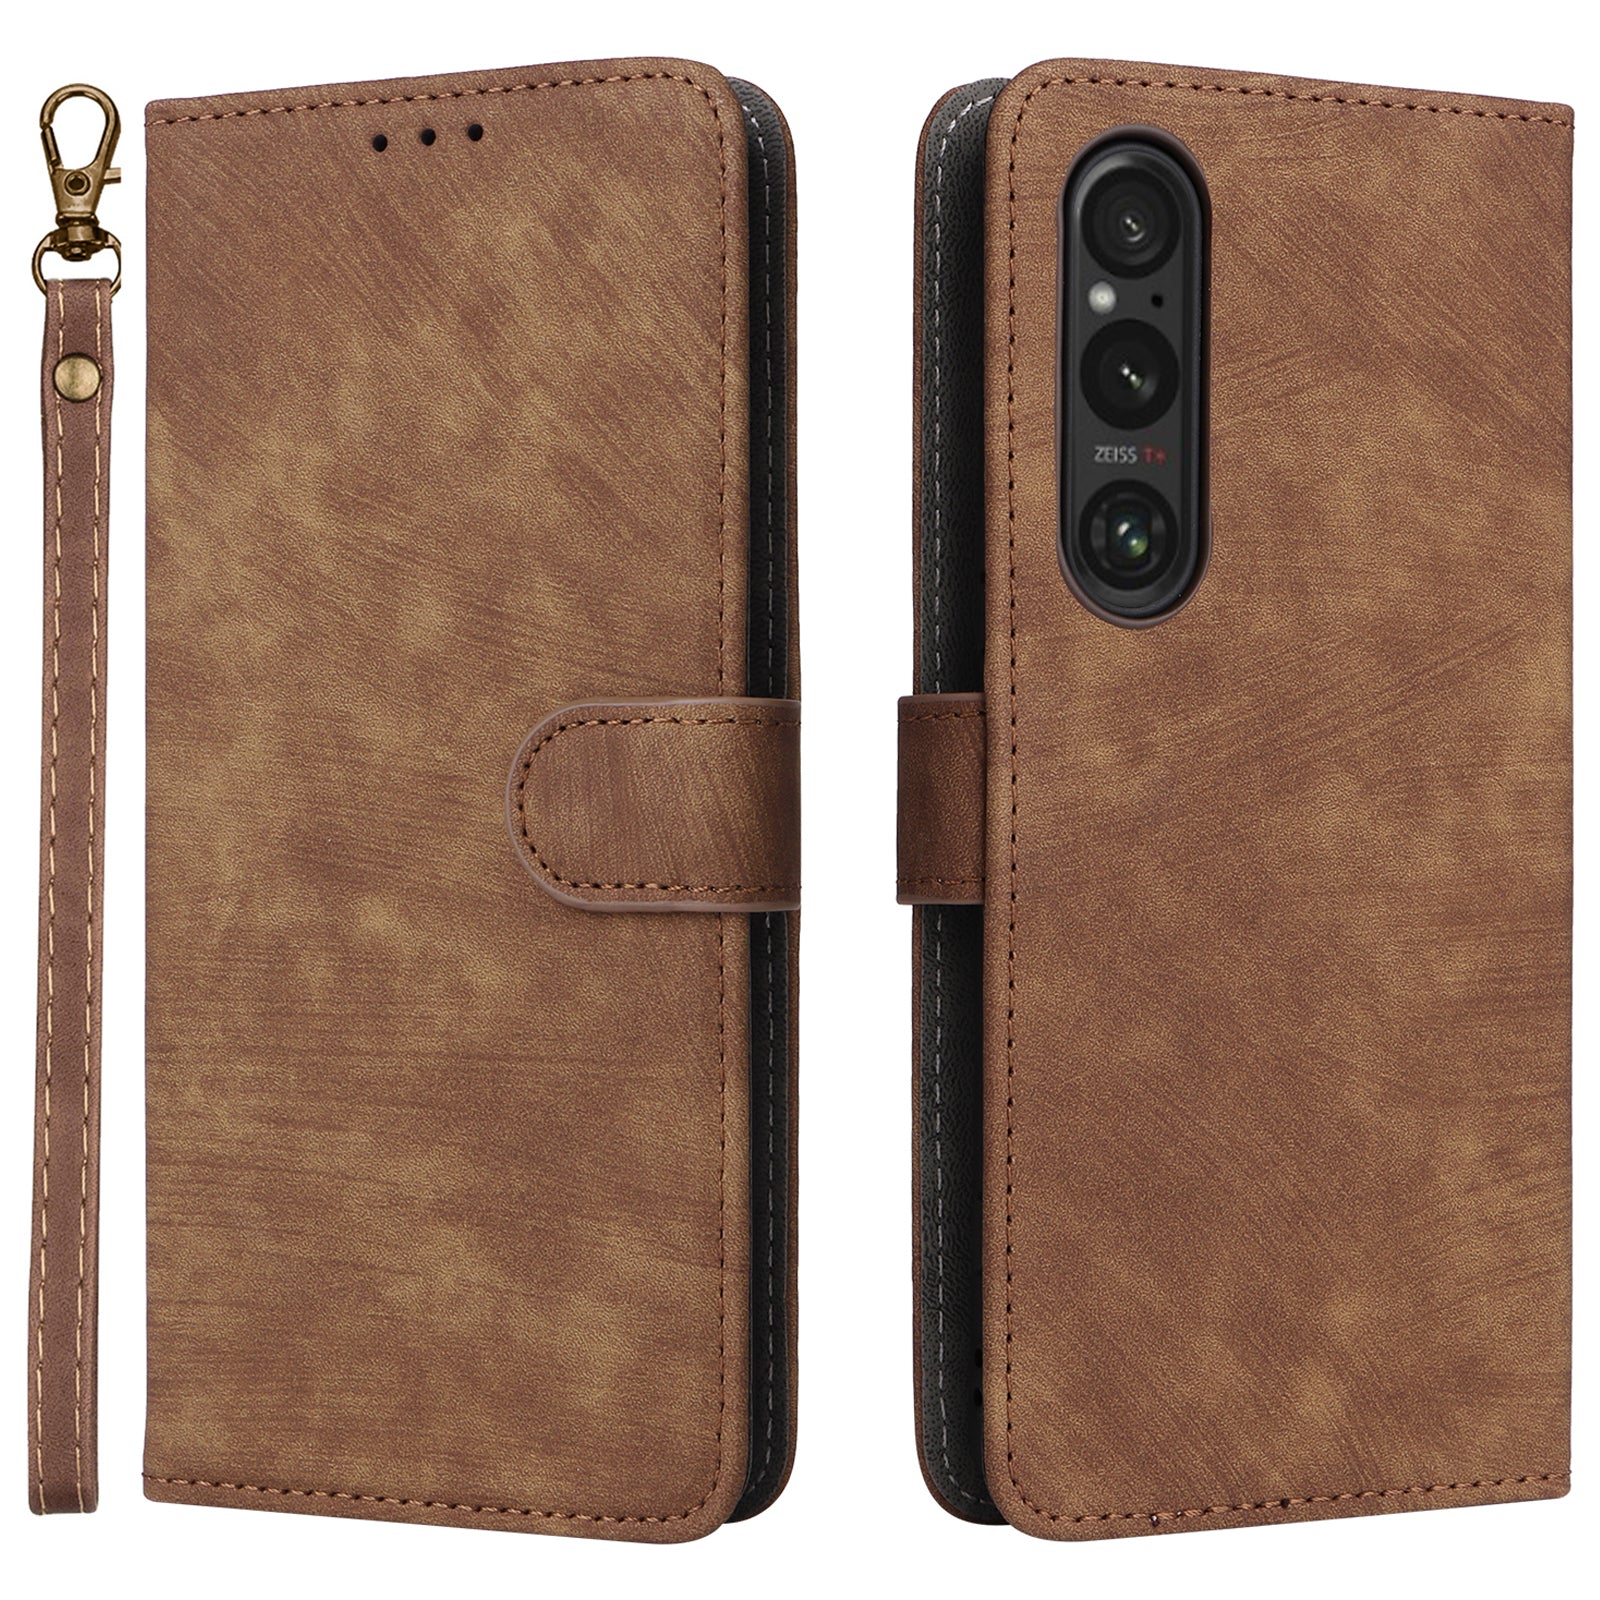 For Sony Xperia 1 VI Leather Case RFID Blocking Wallet Cover with Wrist Strap - Brown